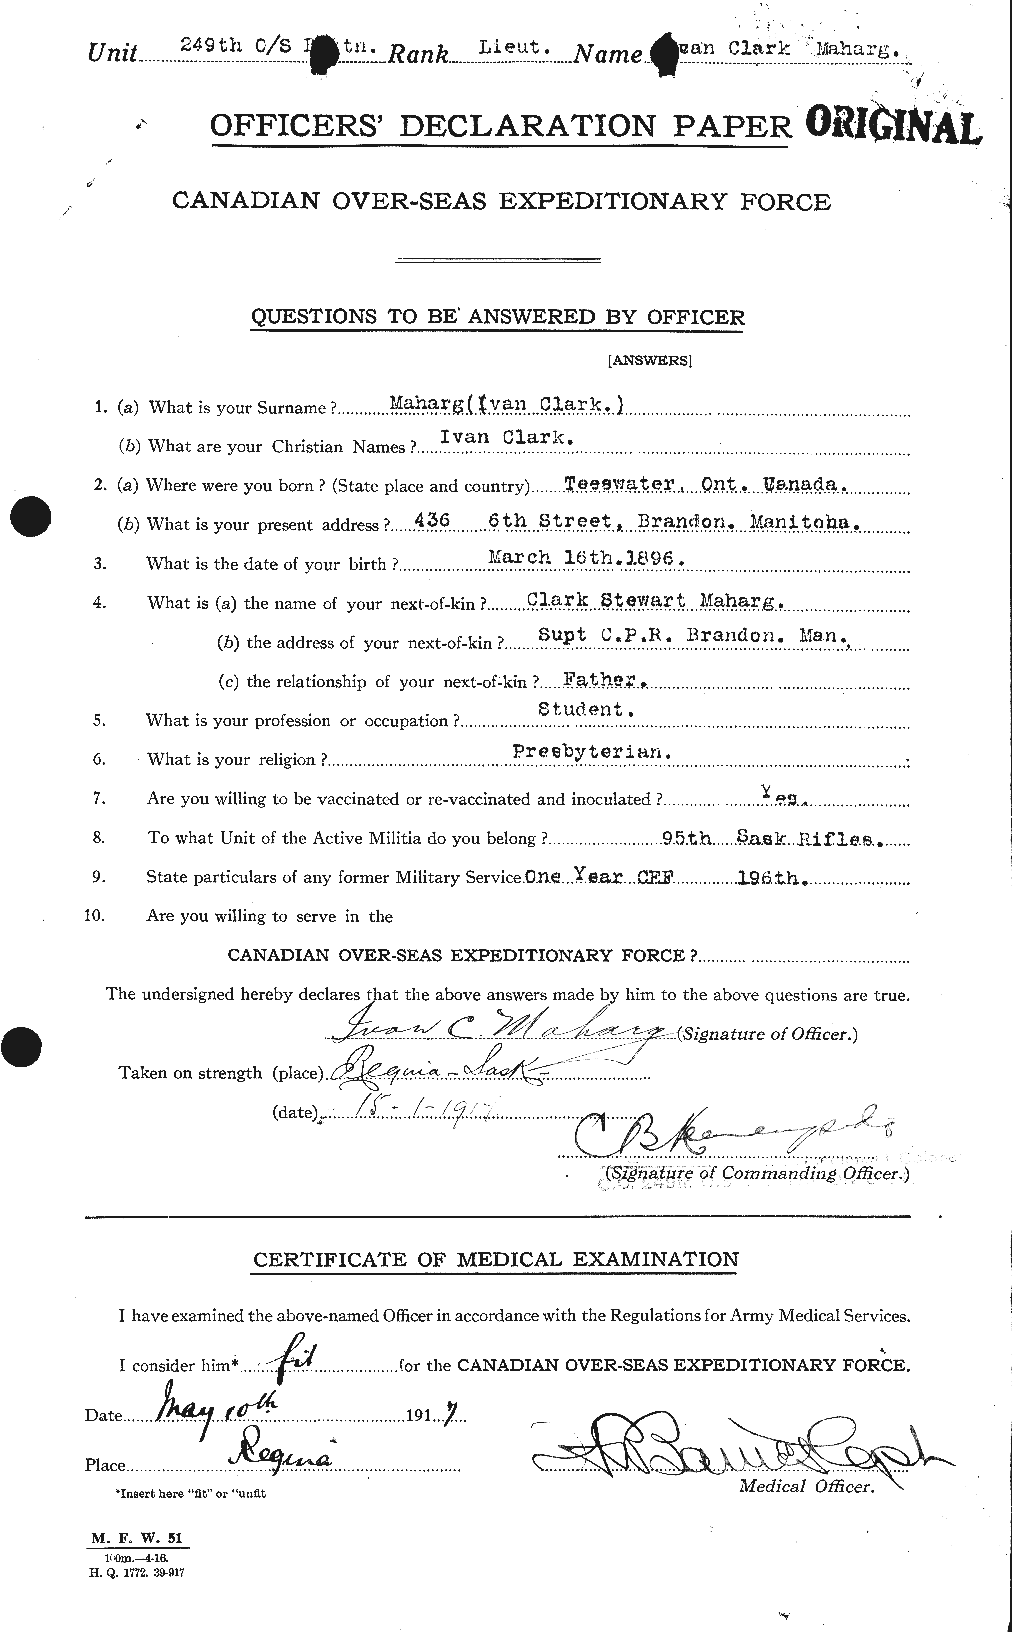 Personnel Records of the First World War - CEF 481956a